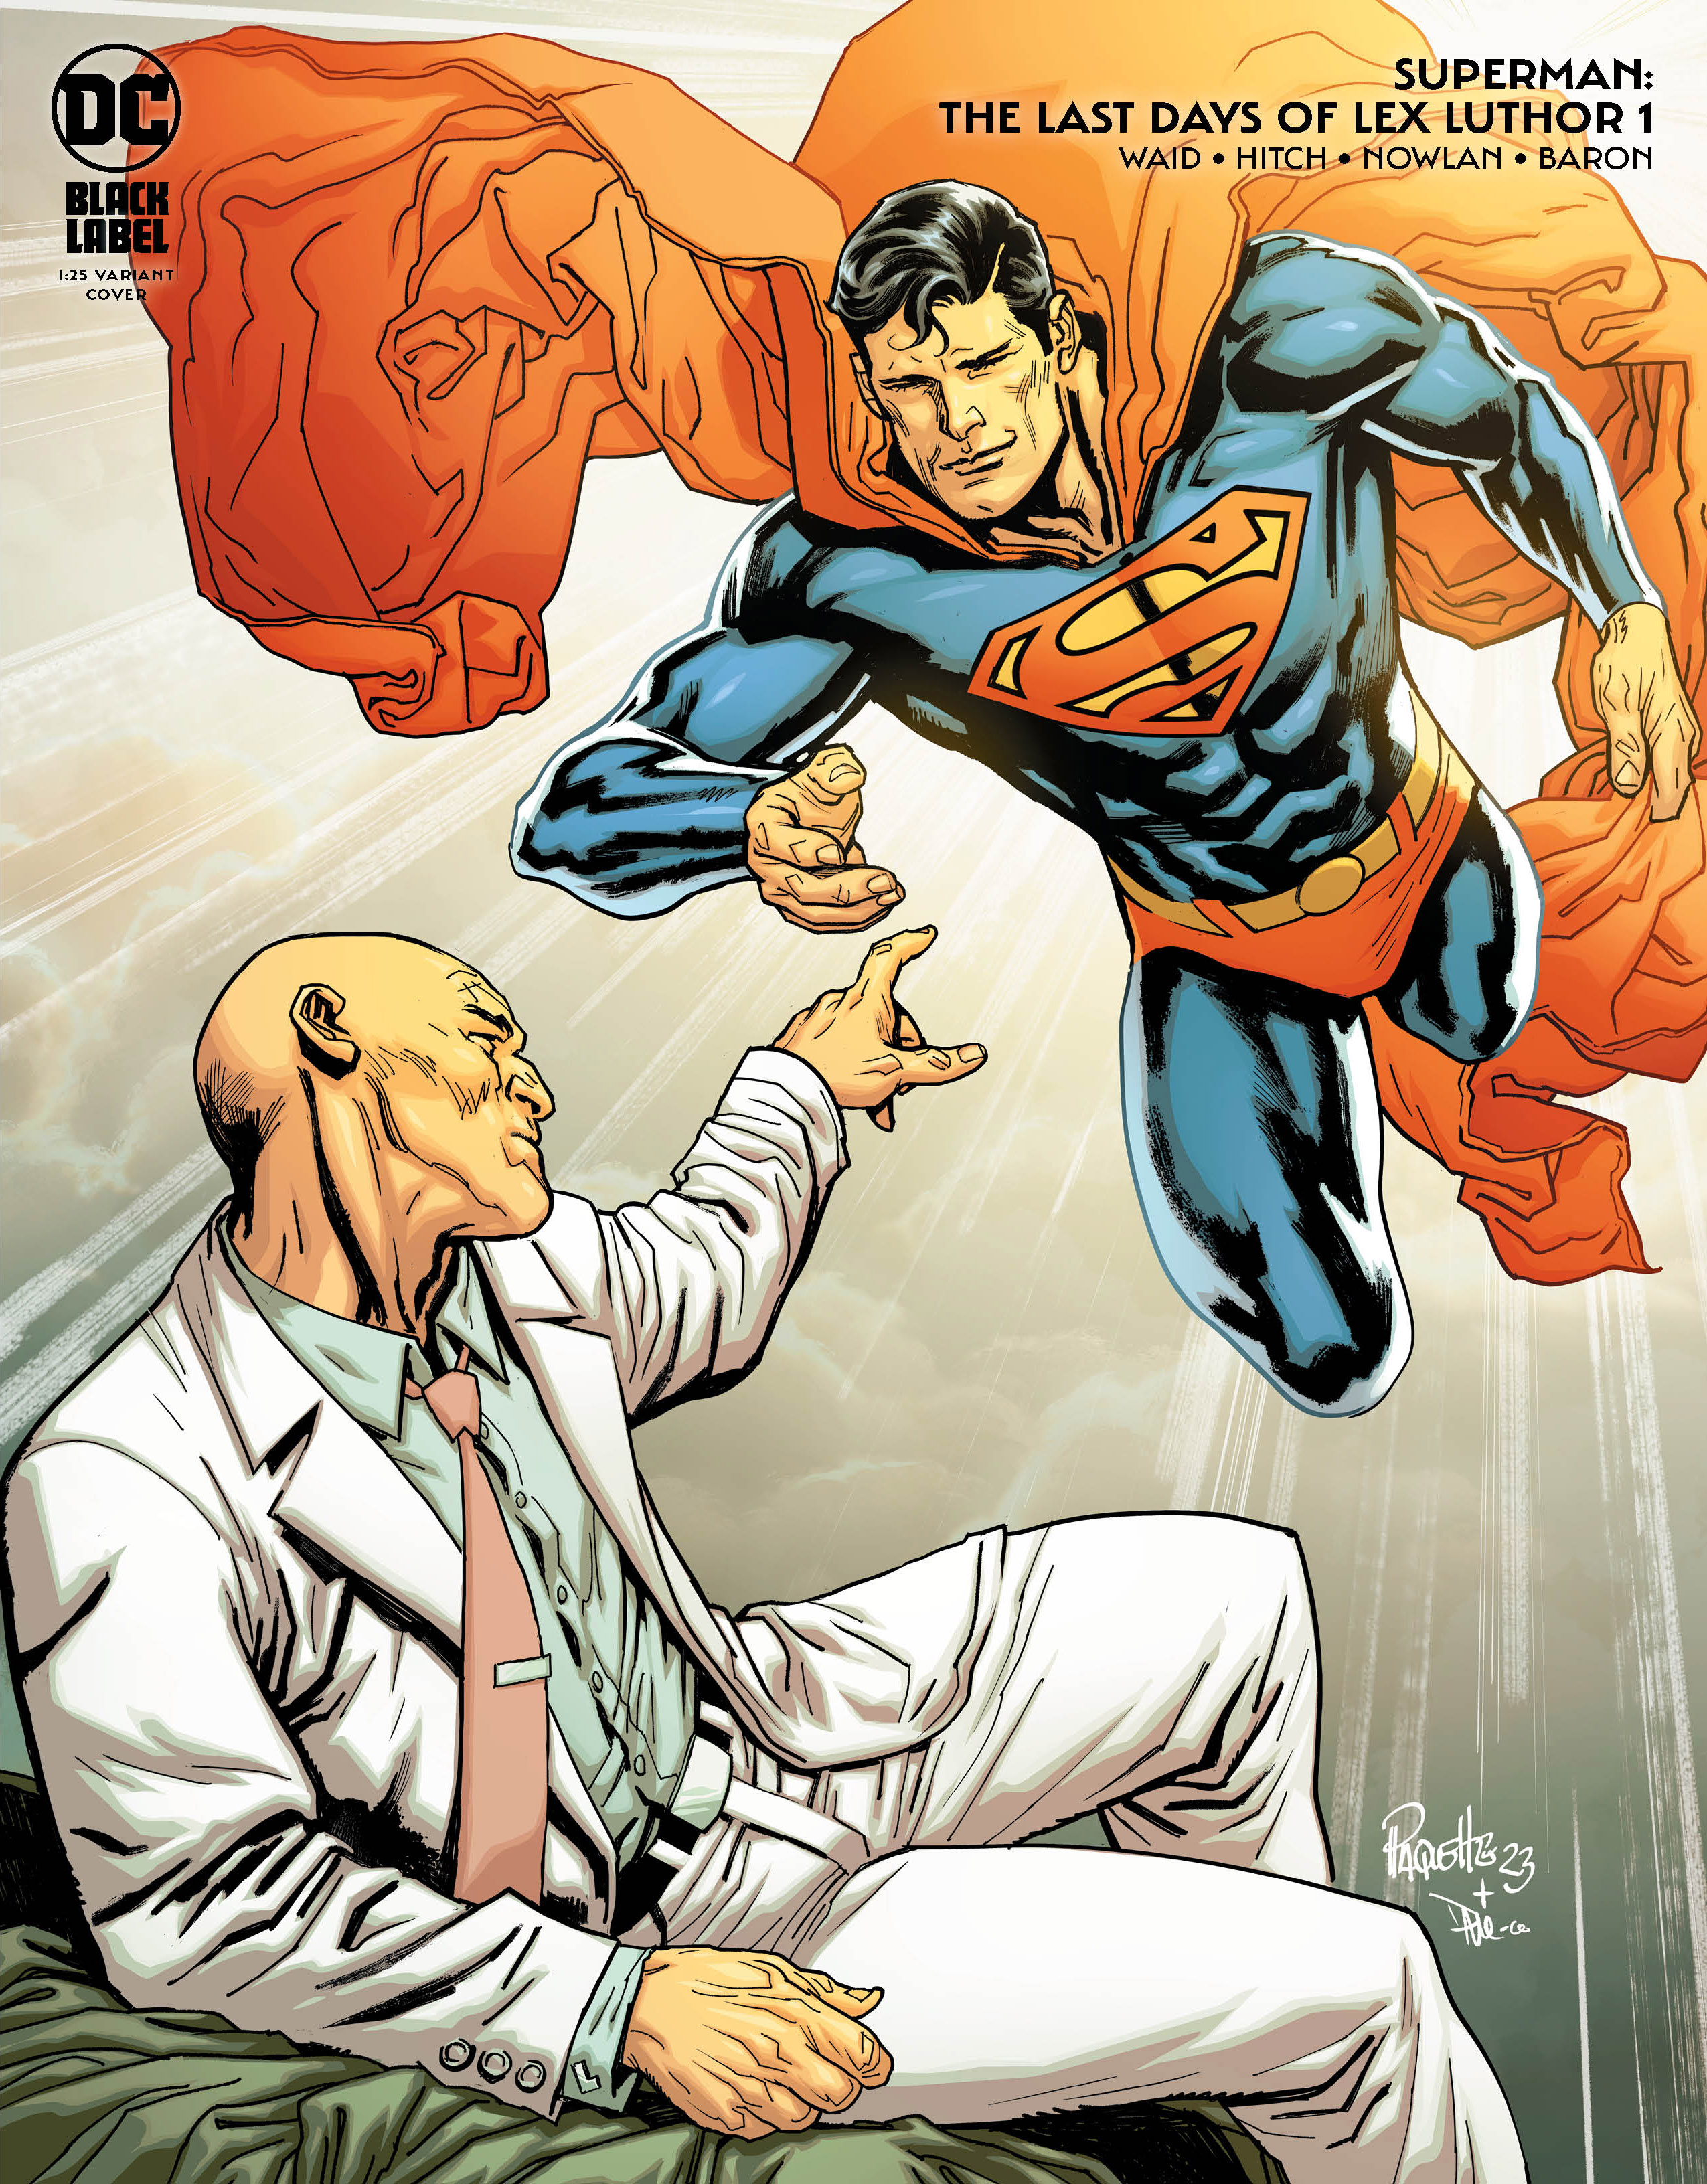 Superman The Last Days of Lex Luthor #1 Cover D 1 for 25 Incentive Yanick Paquette Variant (Of 3)